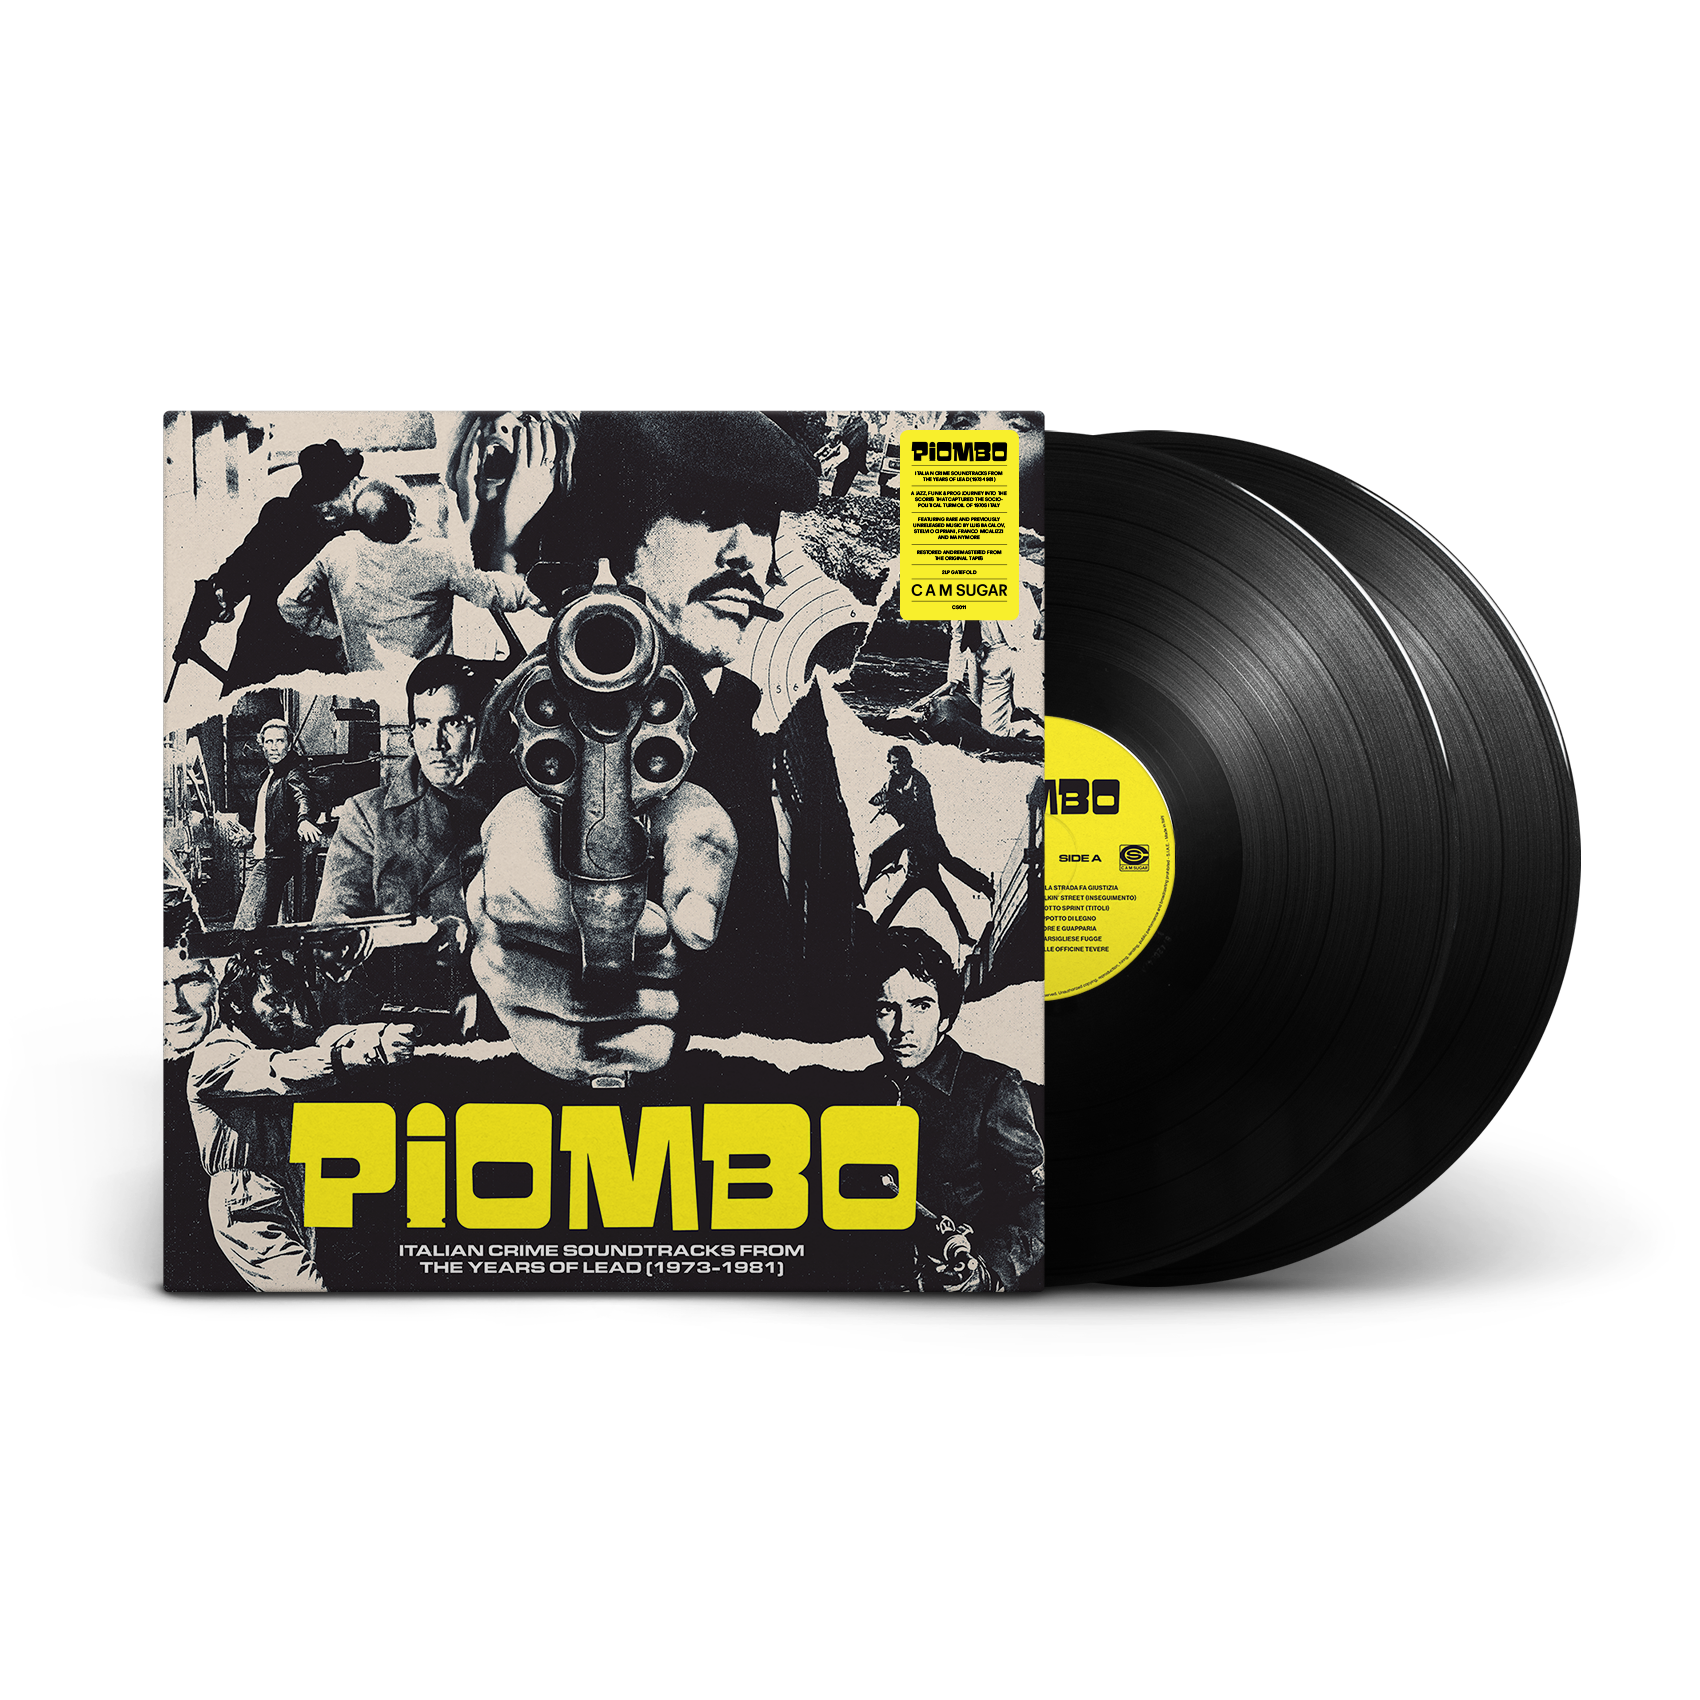 Various Artists - PIOMBO - Italian Crime Soundtracks From The Years Of Lead (1973-1981): Vinyl 2LP